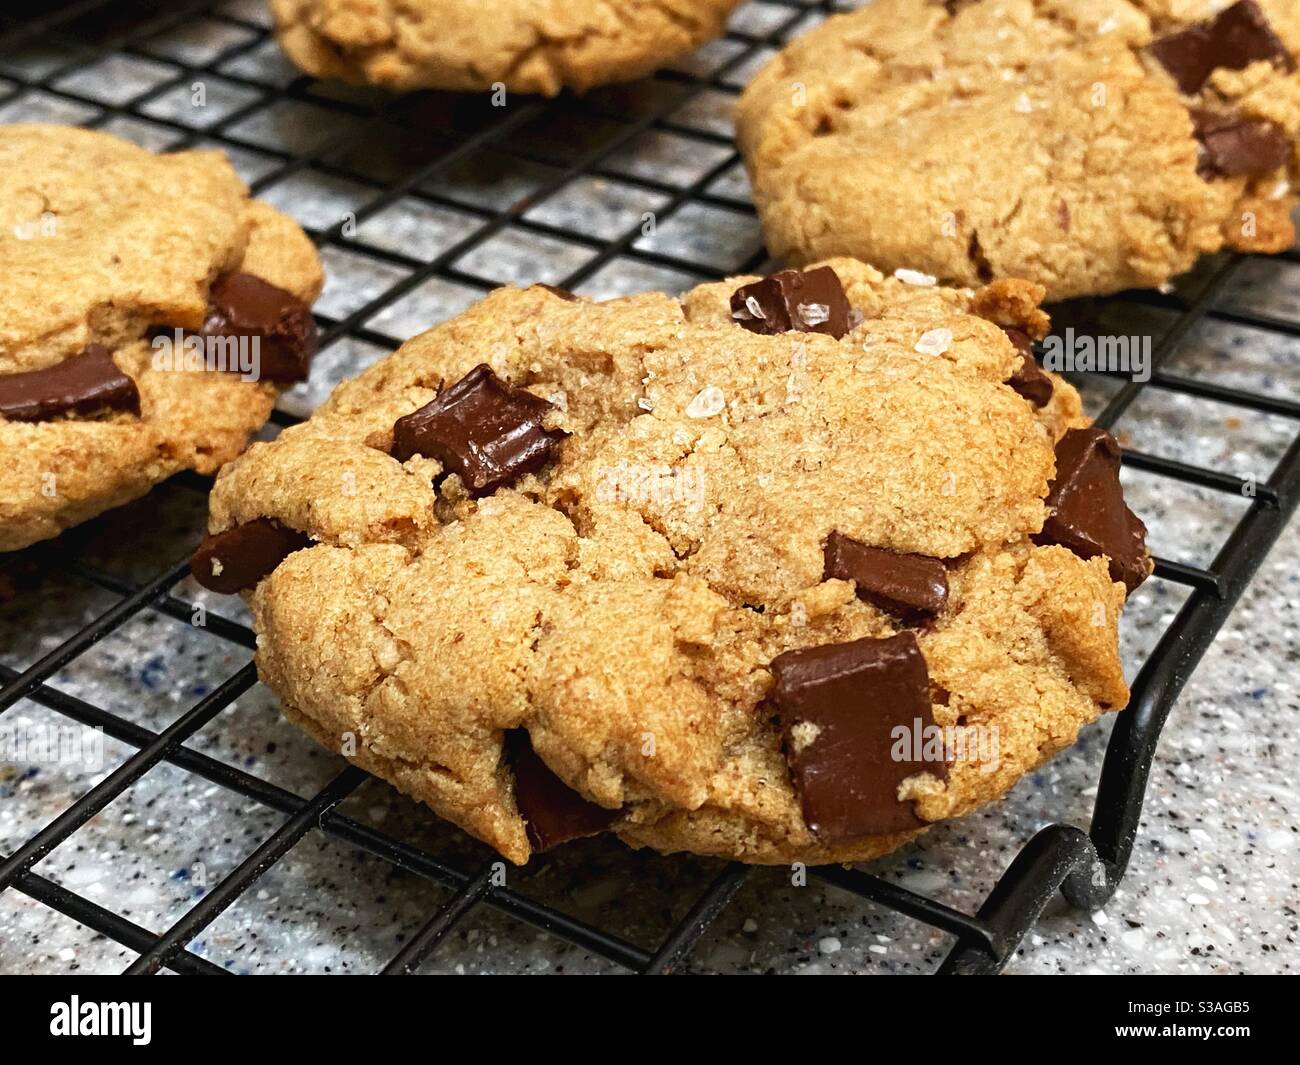 Chocolate chunk cookies on a cooling rack. Stock Photo